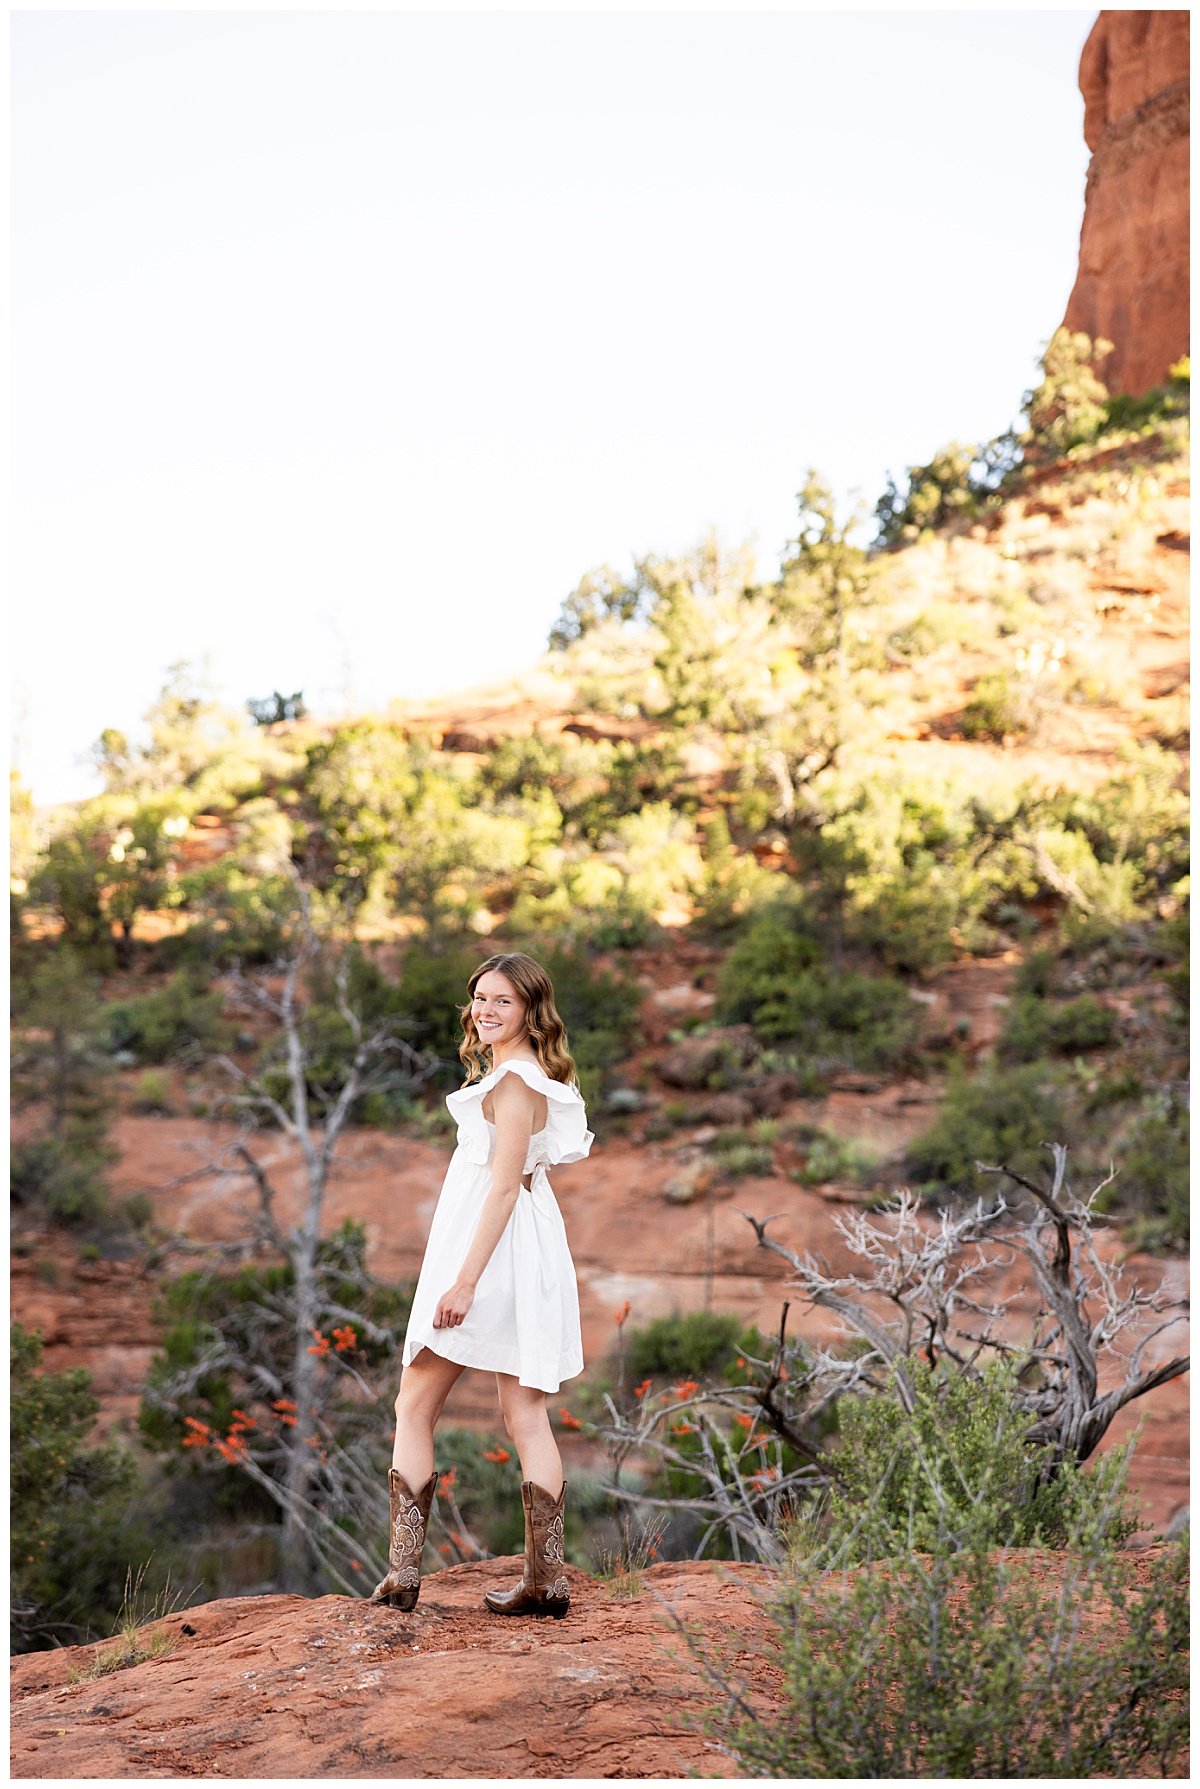 A brunette high school senior smiles over her shoulder in a white knee-lenght dress and brown cowboy boots at the base of butte in Sedona, Arizona, during her shoot with North Dakota based travel photographer, Kellie Rochelle Photography.